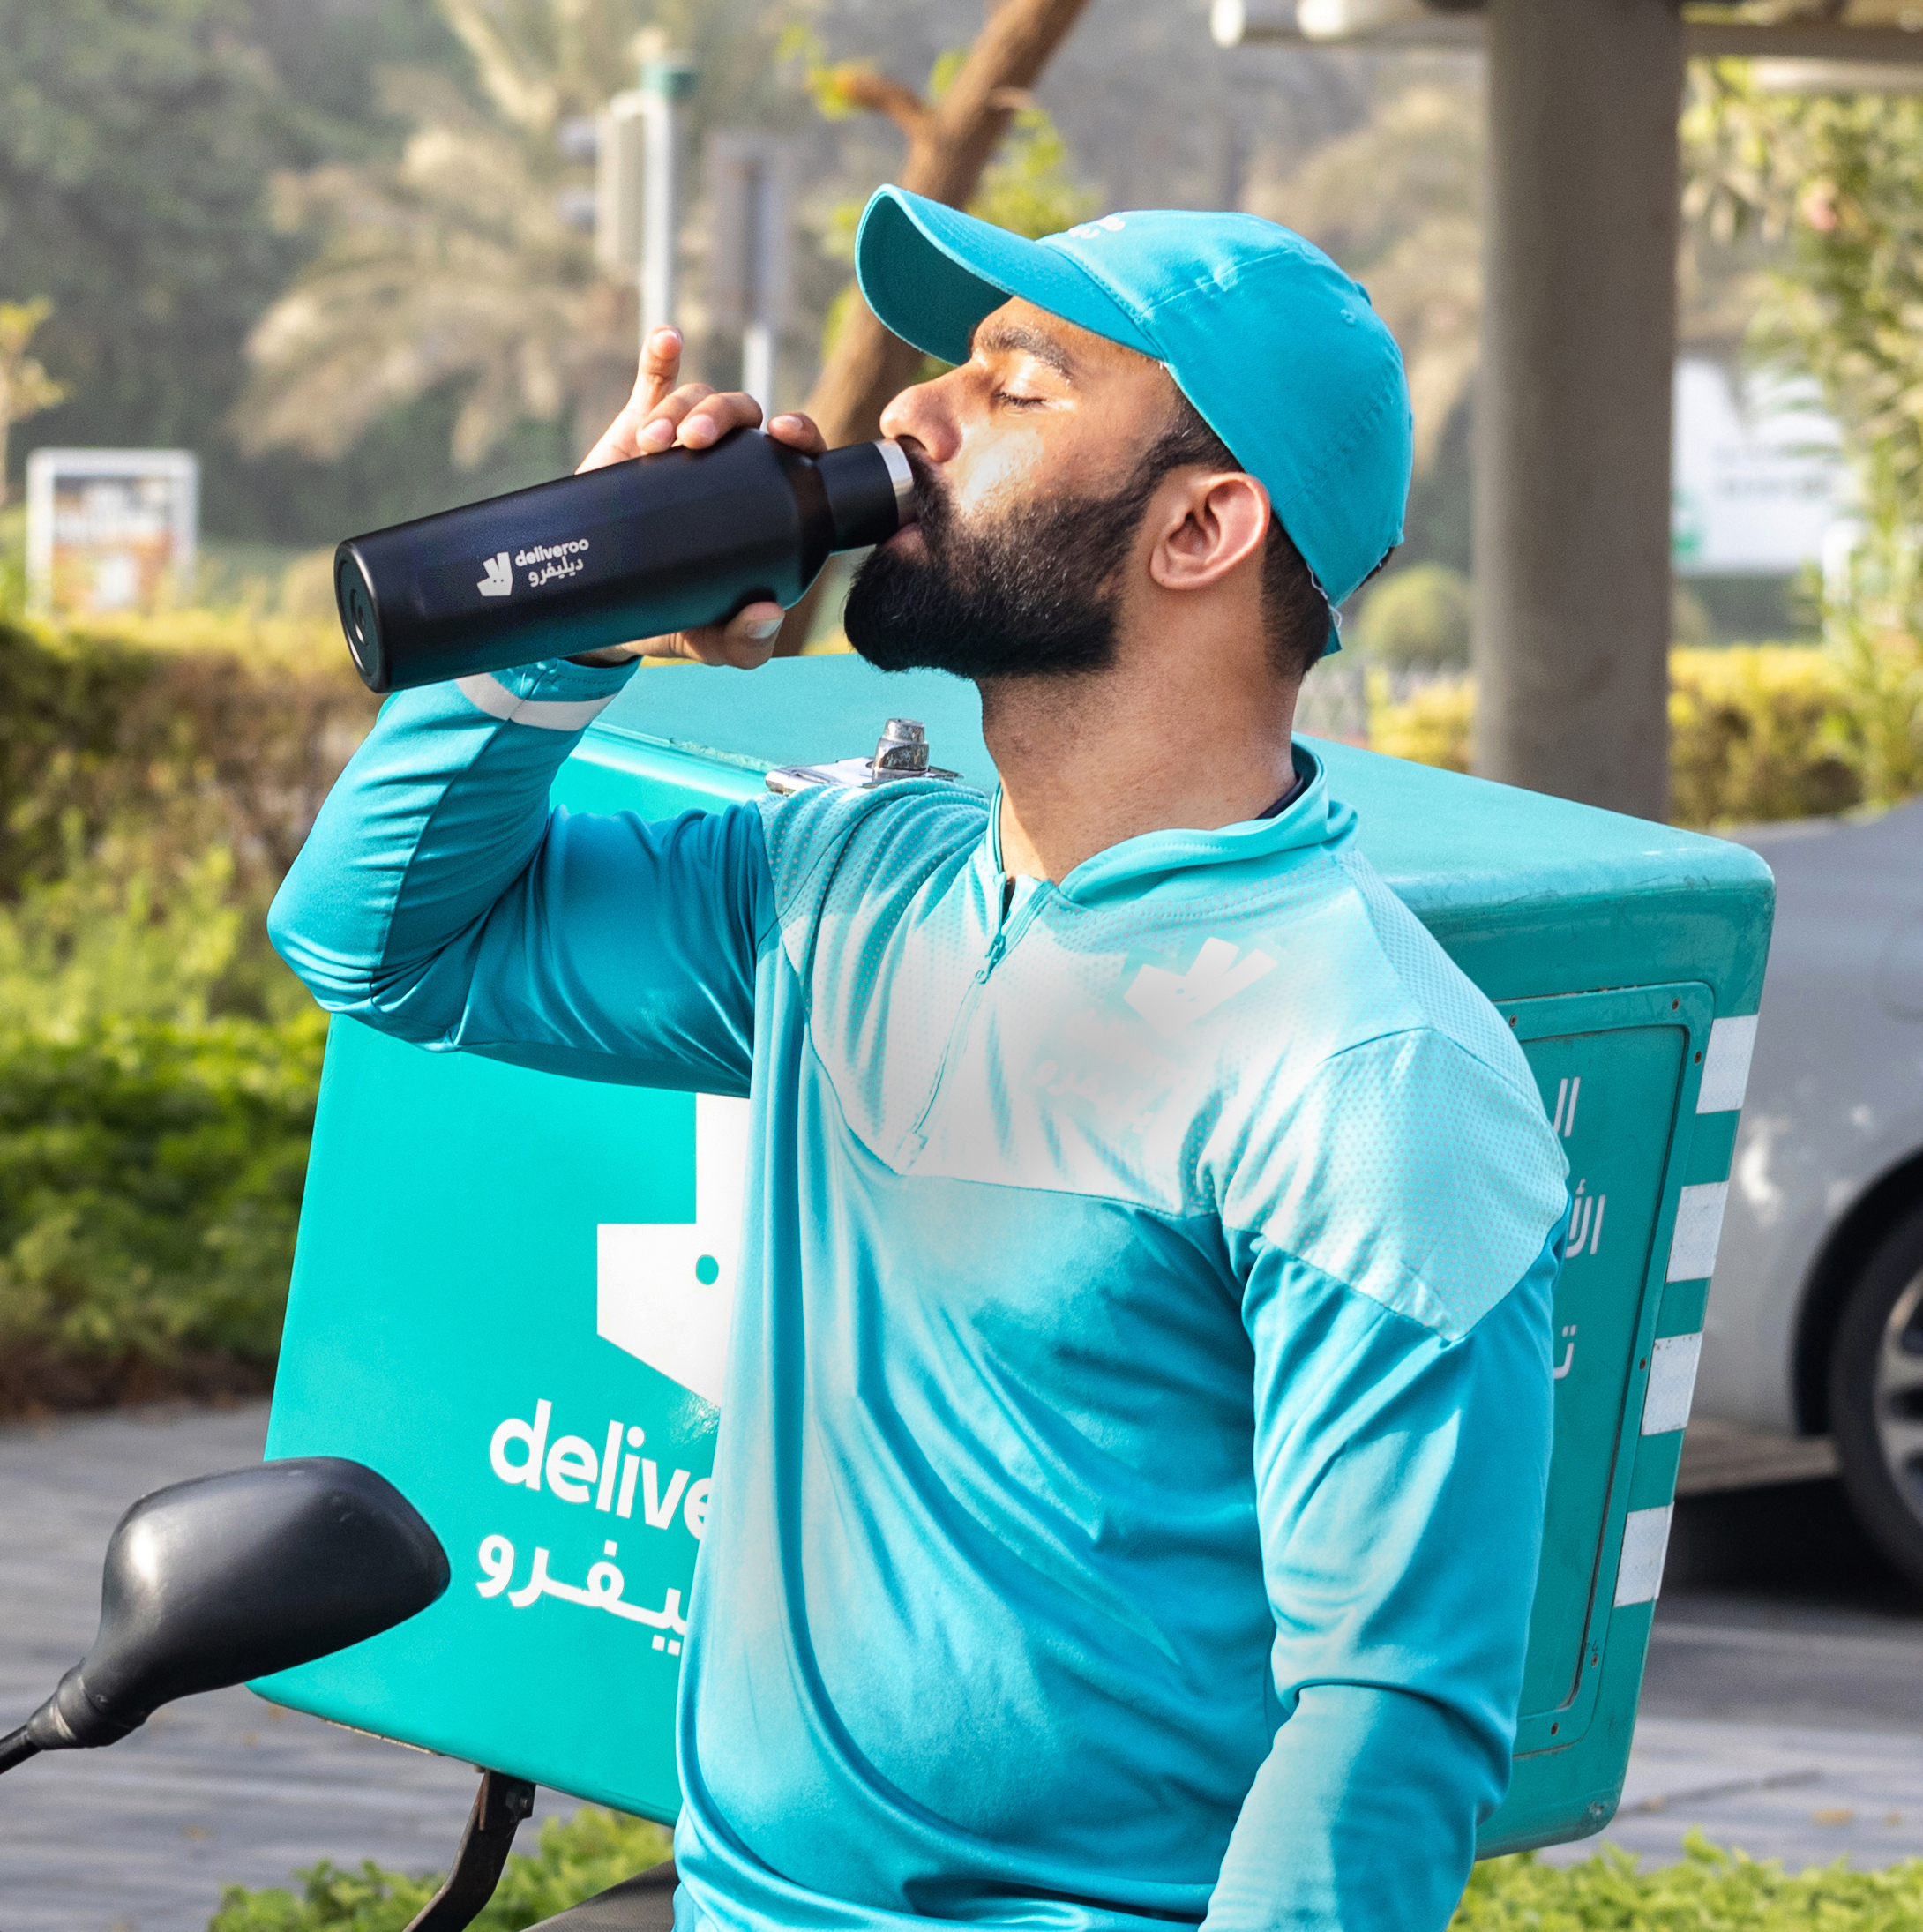 Deliveroo Riders turn to reusable water bottles to reduce single-use plastic wastage